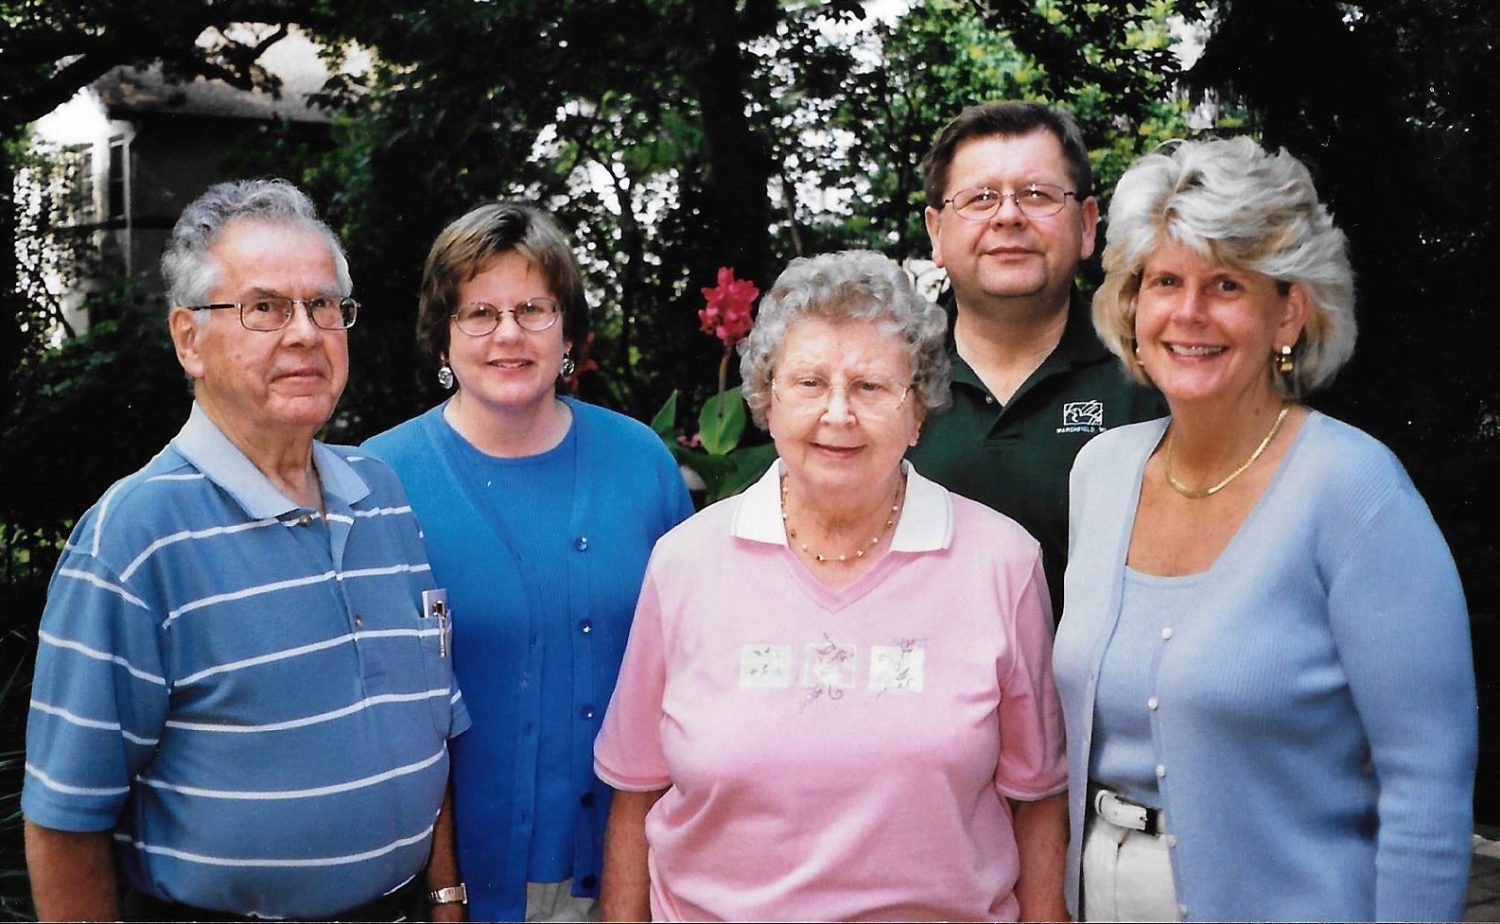 From left: Harry J., Judy, Violet, Russ, and Nancy Wenzel in 2002.